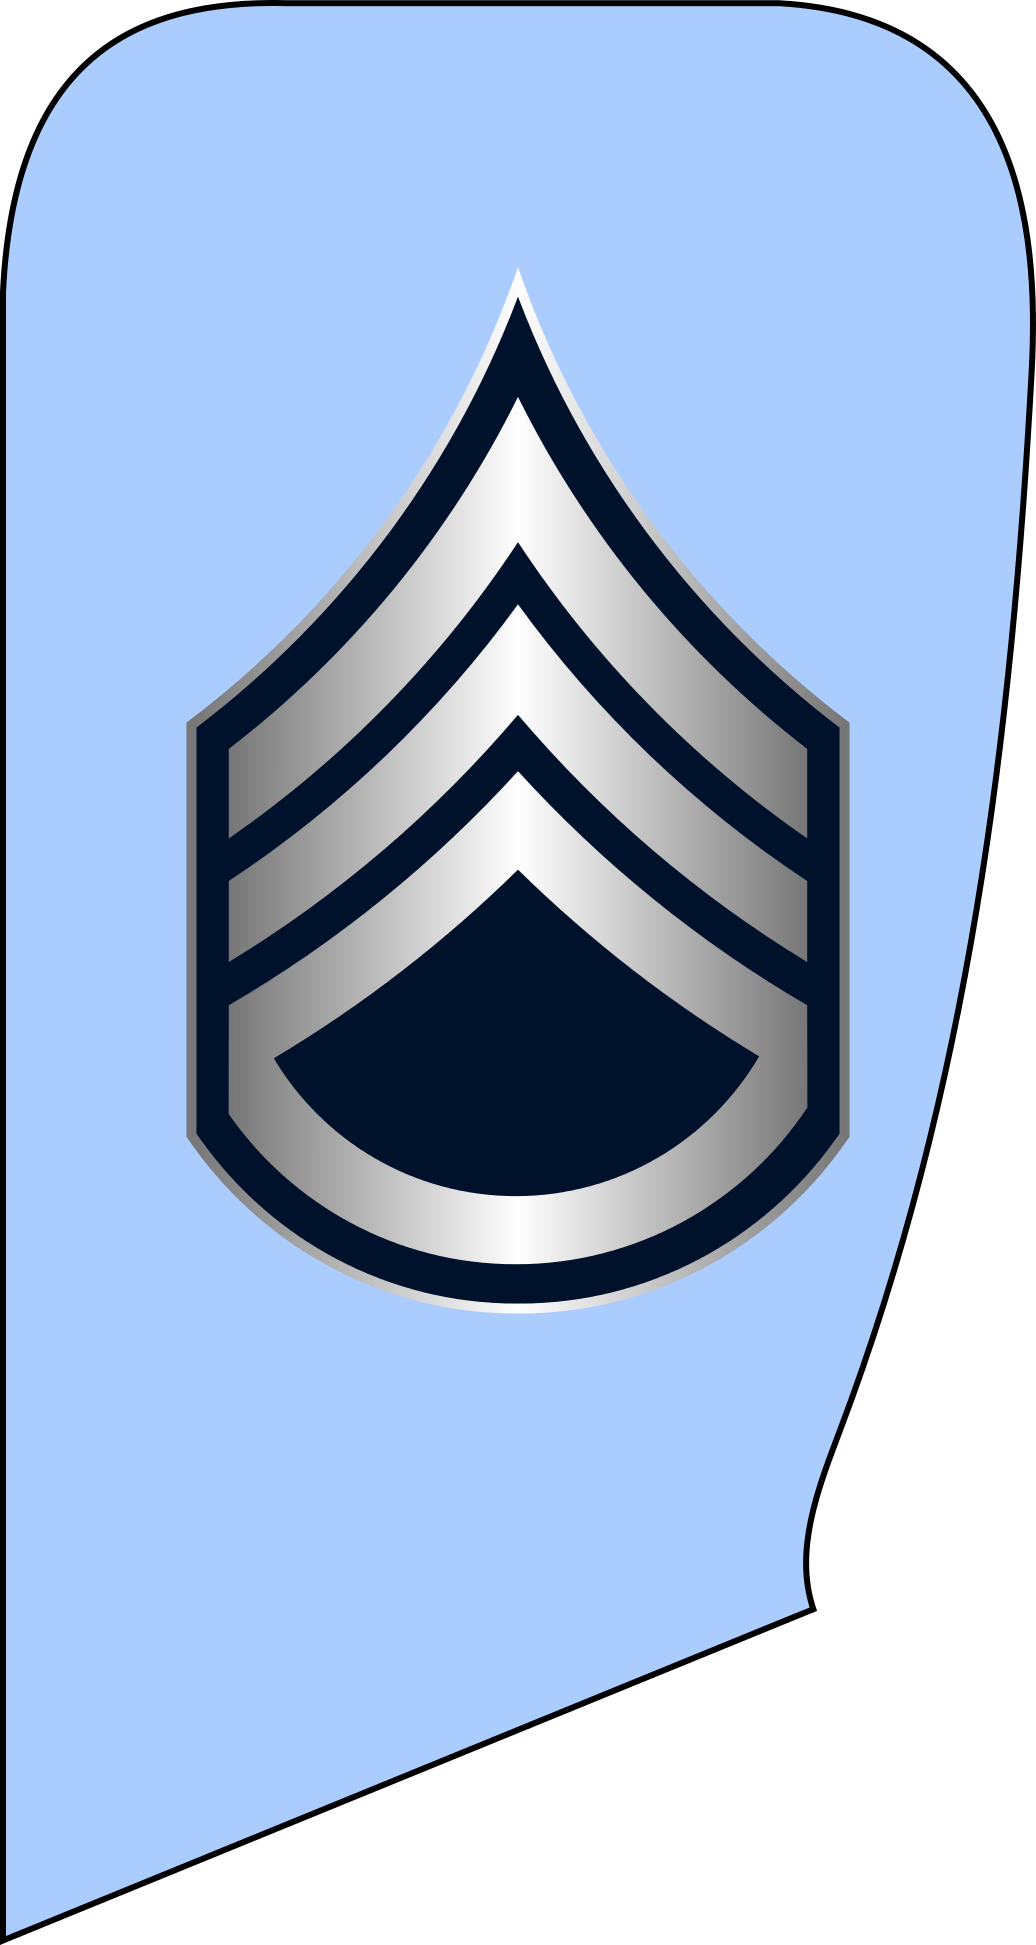 Air Force Military Ranks And Insignia - Sergeant Major Rank Army (1036x1945)